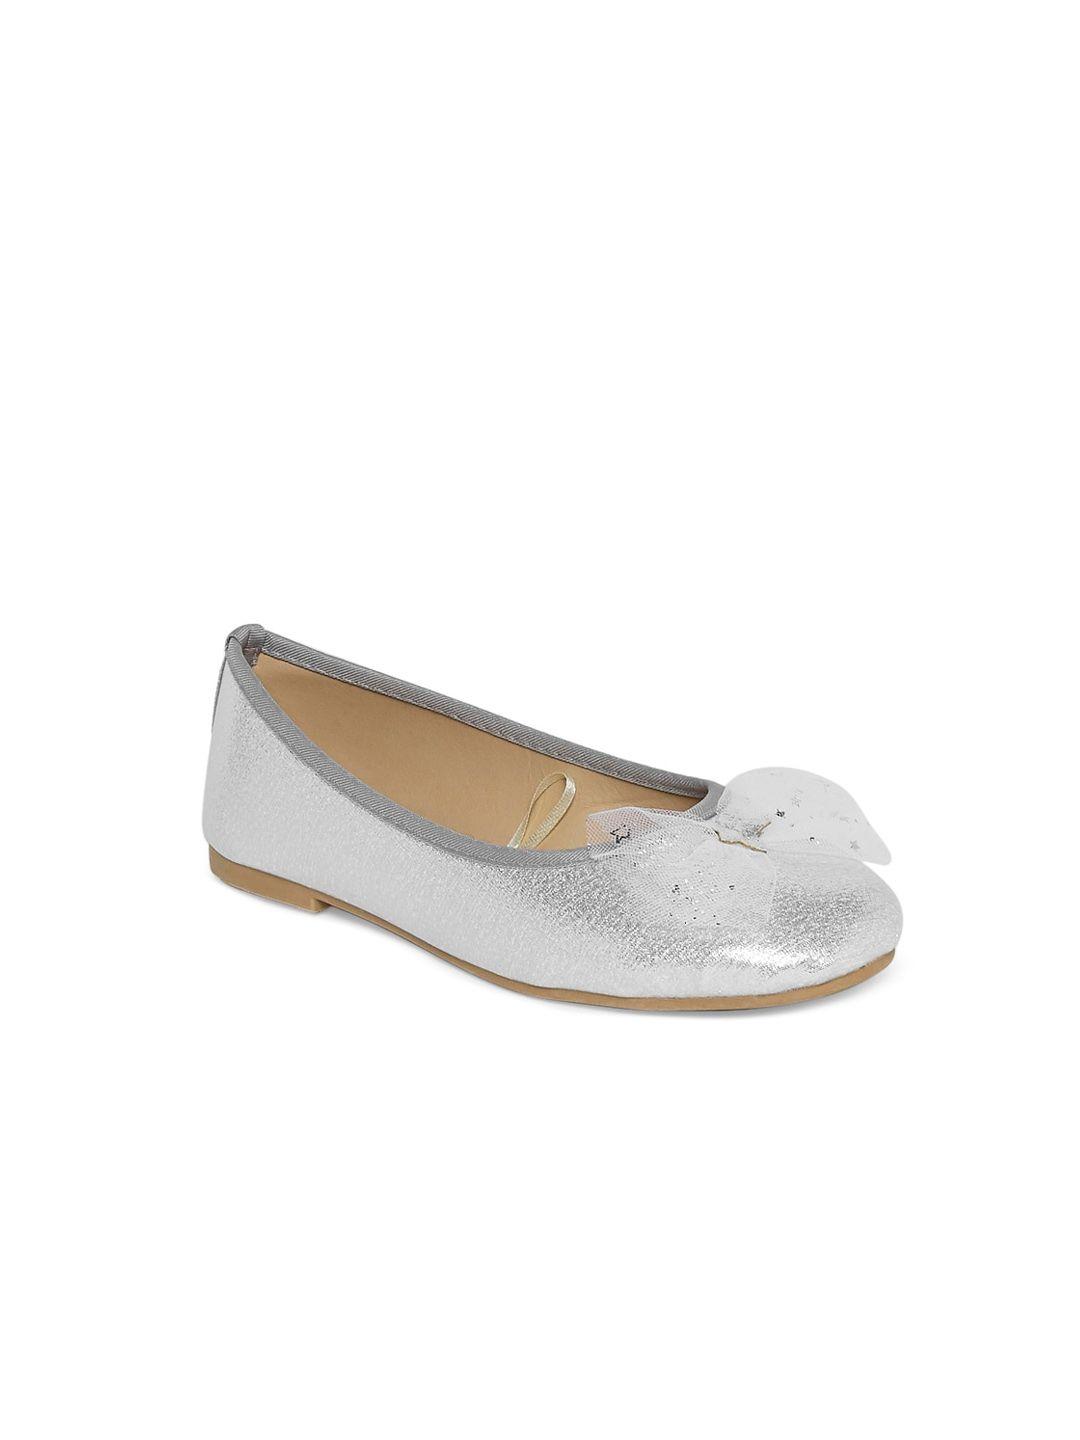 pantaloons junior girls silver-toned ballerinas with bow